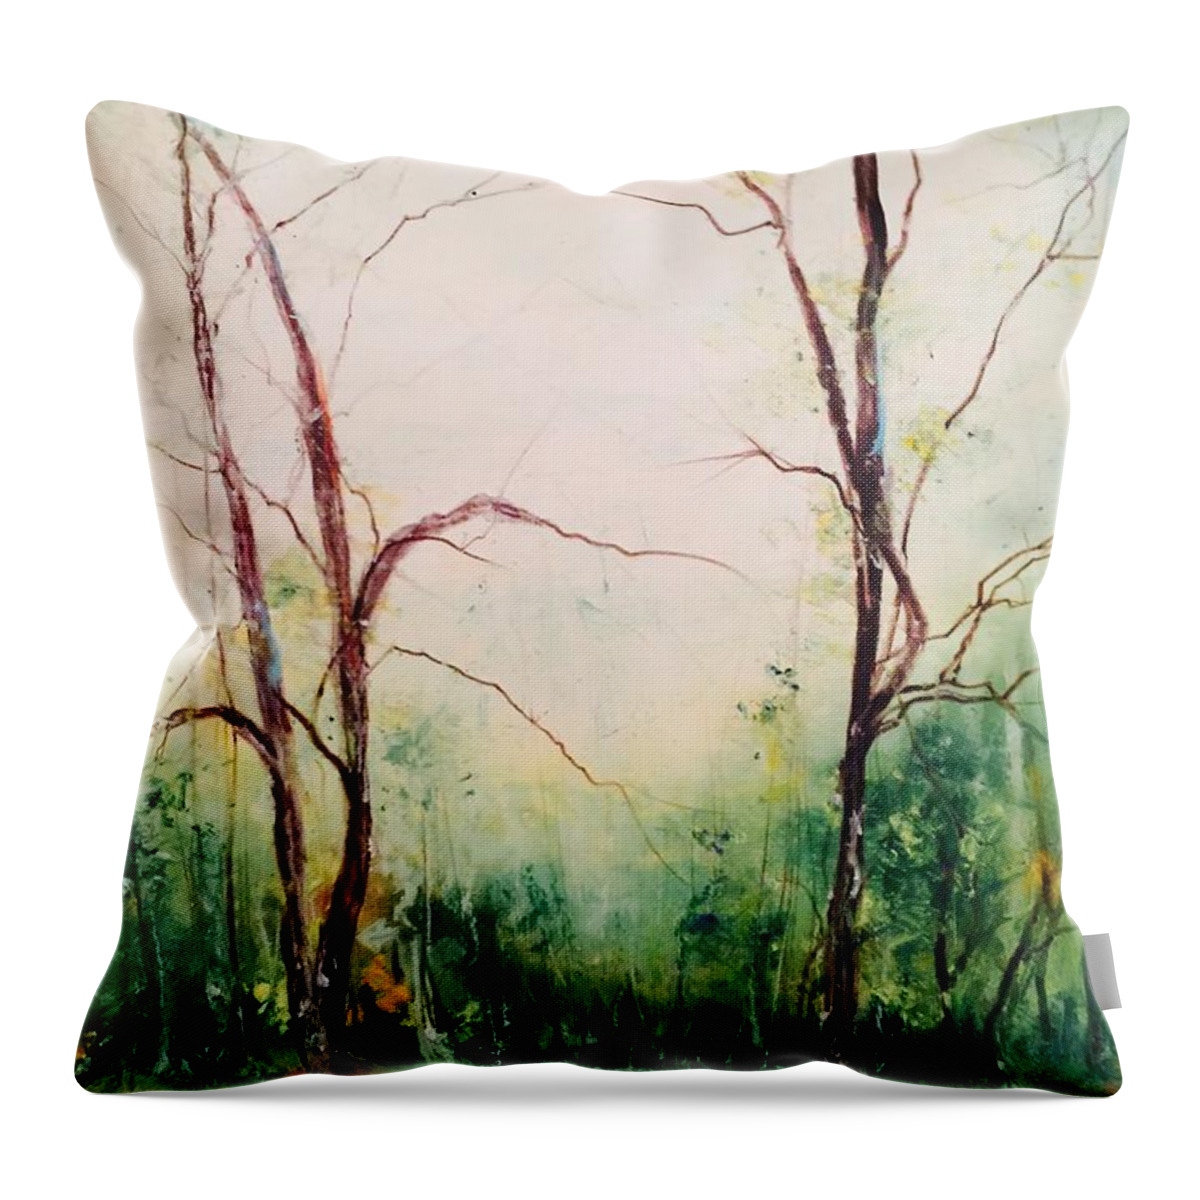  Throw Pillow featuring the painting Long Walk Home by Robin Miller-Bookhout